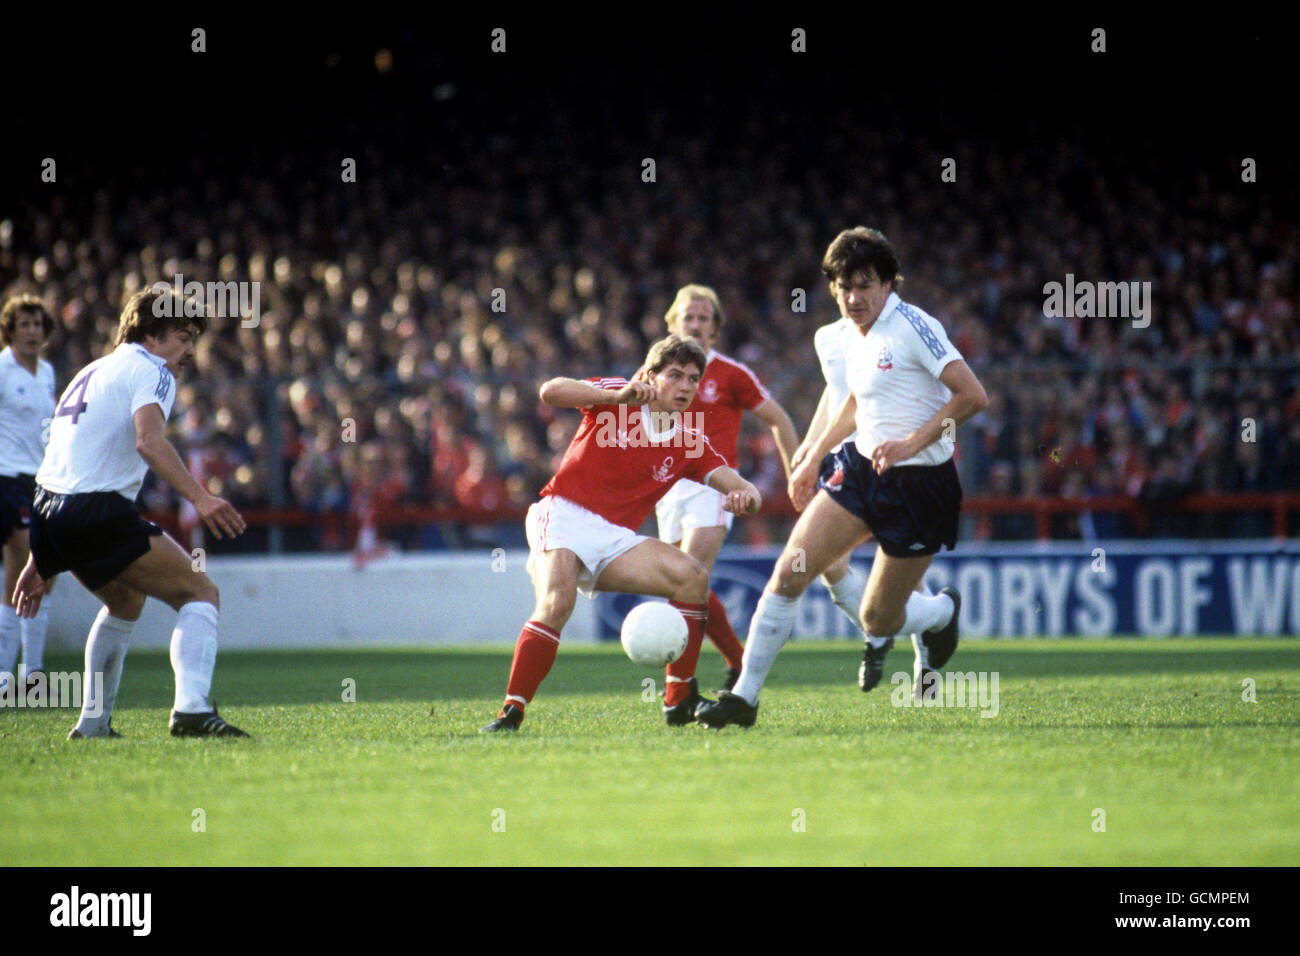 Soccer - Football League Division One - Nottingham Forest v Bolton Wanderers - City Ground. Left to right, Sam Allardyce of Bolton Wanderers, Gary Mills of Nottingham Forest, and Bolton's Paul Jones. Stock Photo